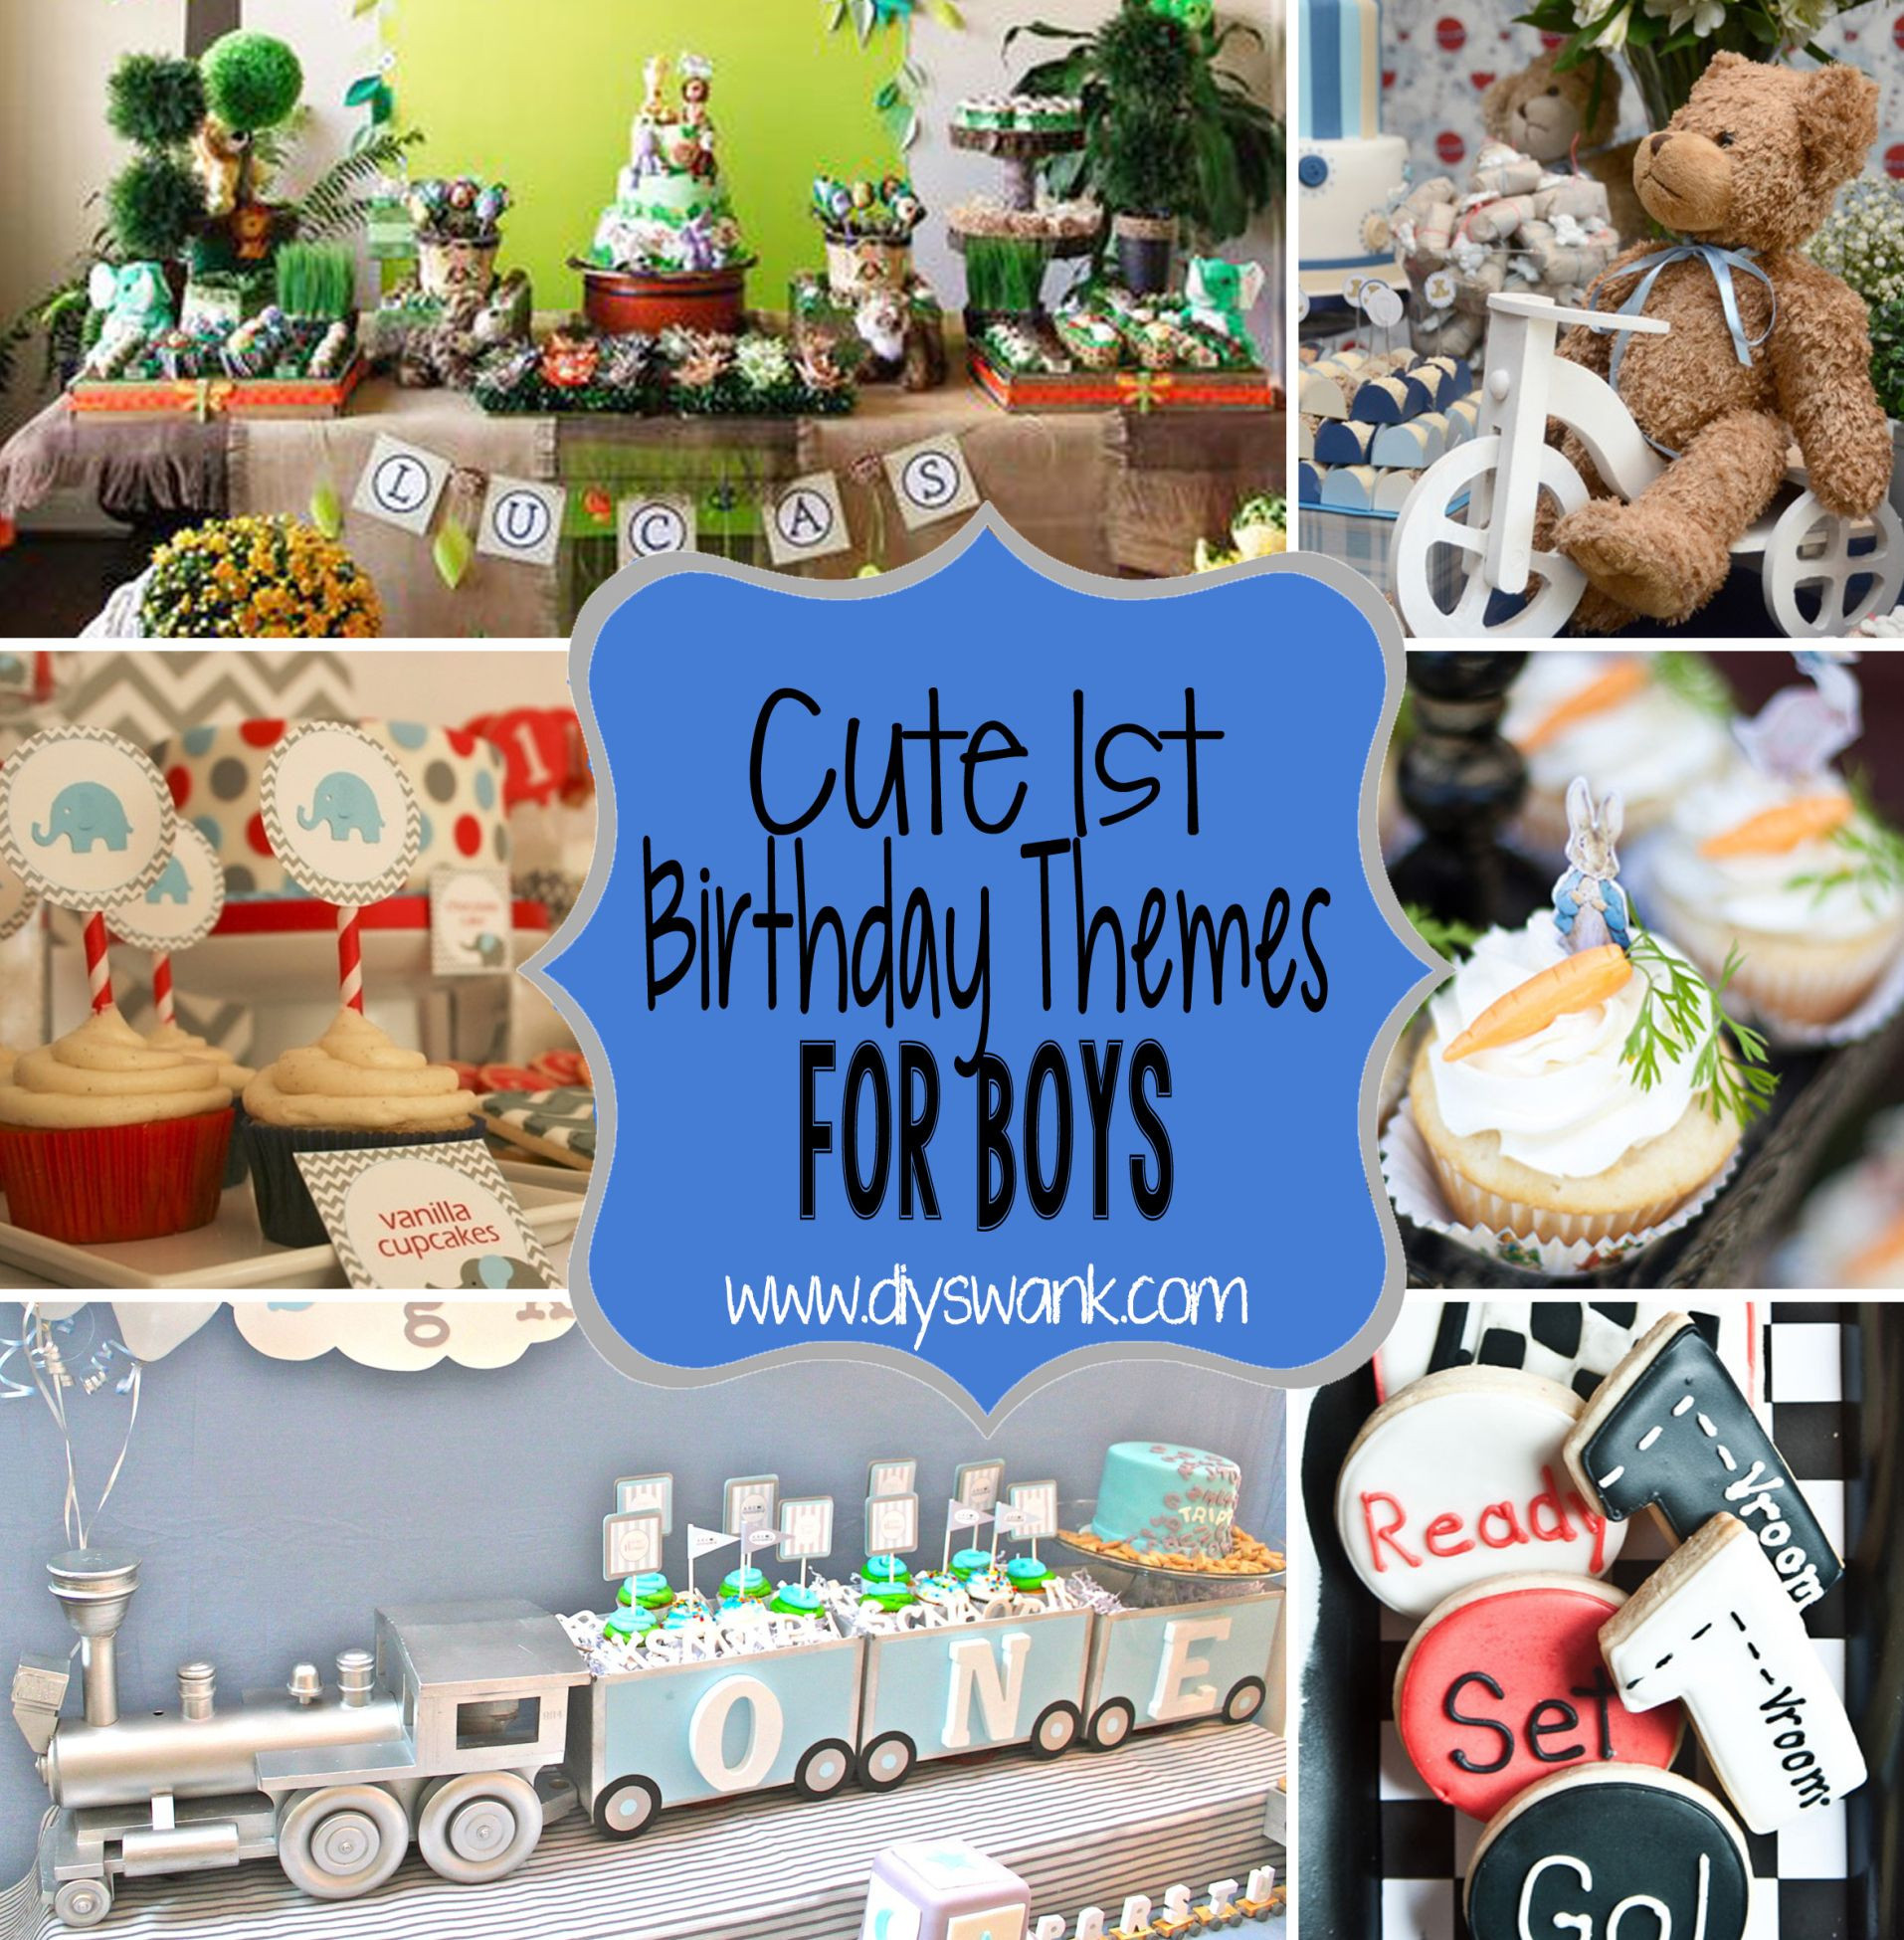 1st Birthday Party Supplies For Boys
 Cute Boy 1st Birthday Party Themes With images